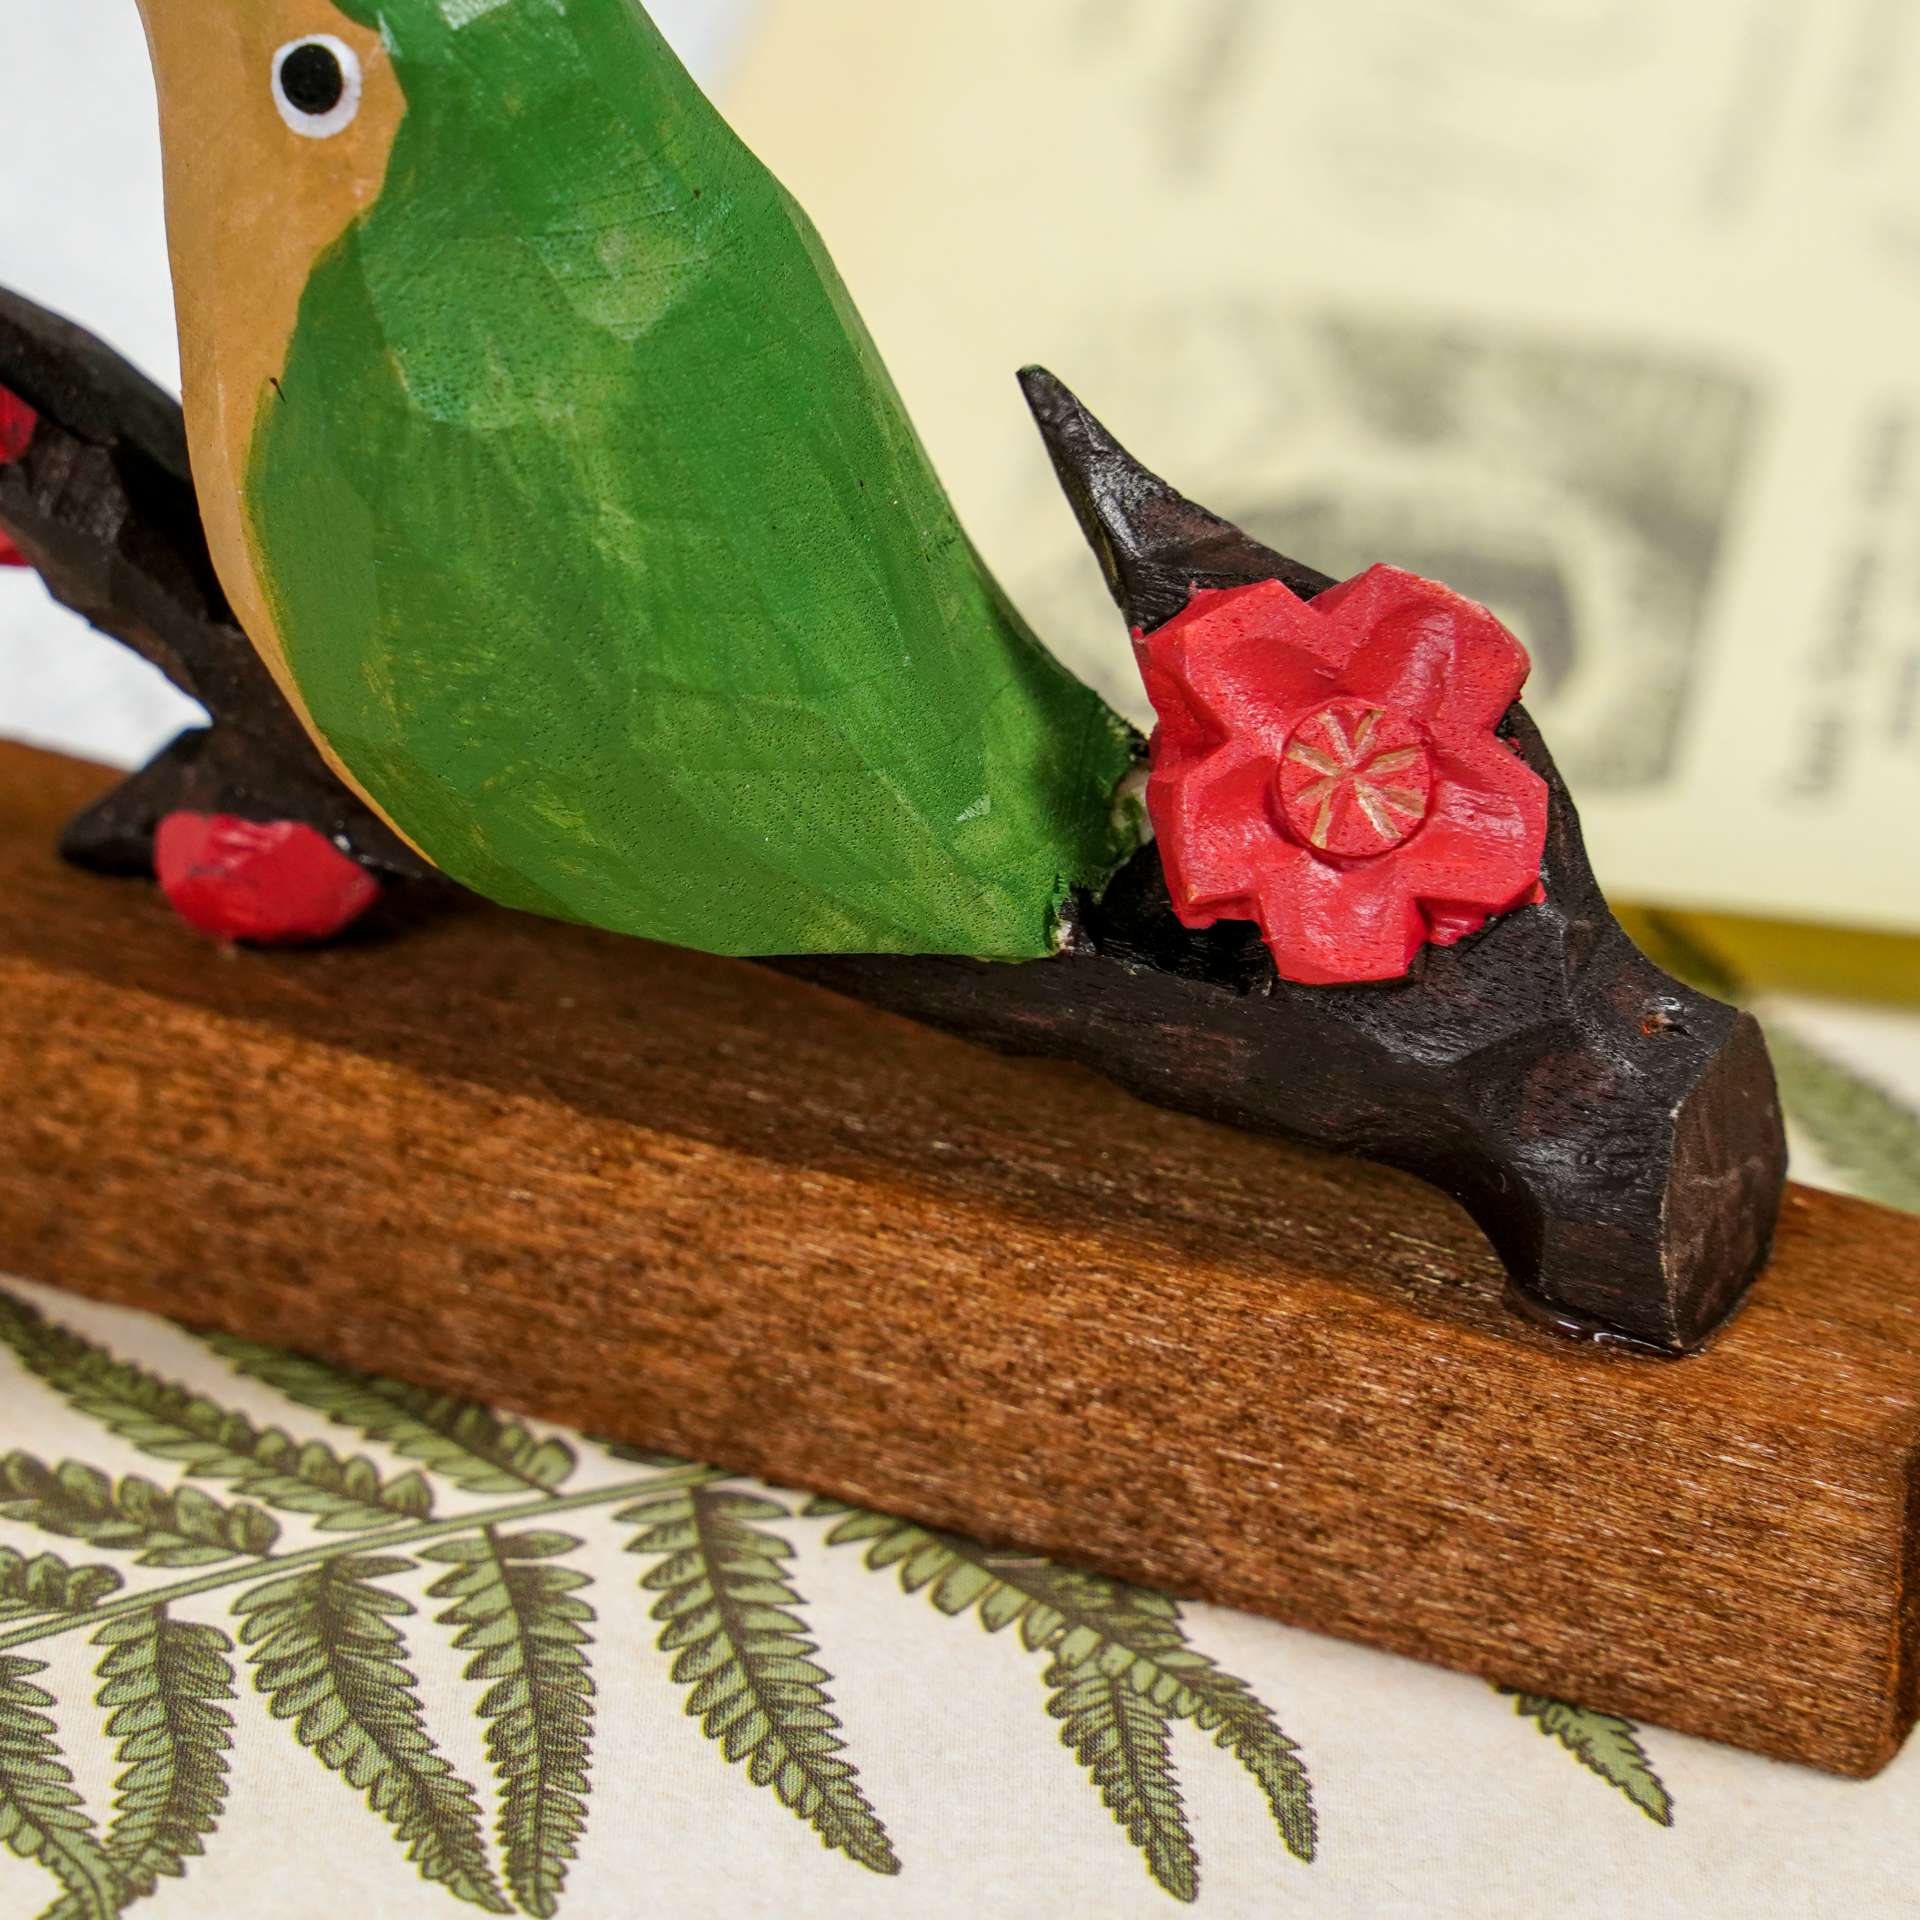 Magpie handmade wood carving solid wood ornaments